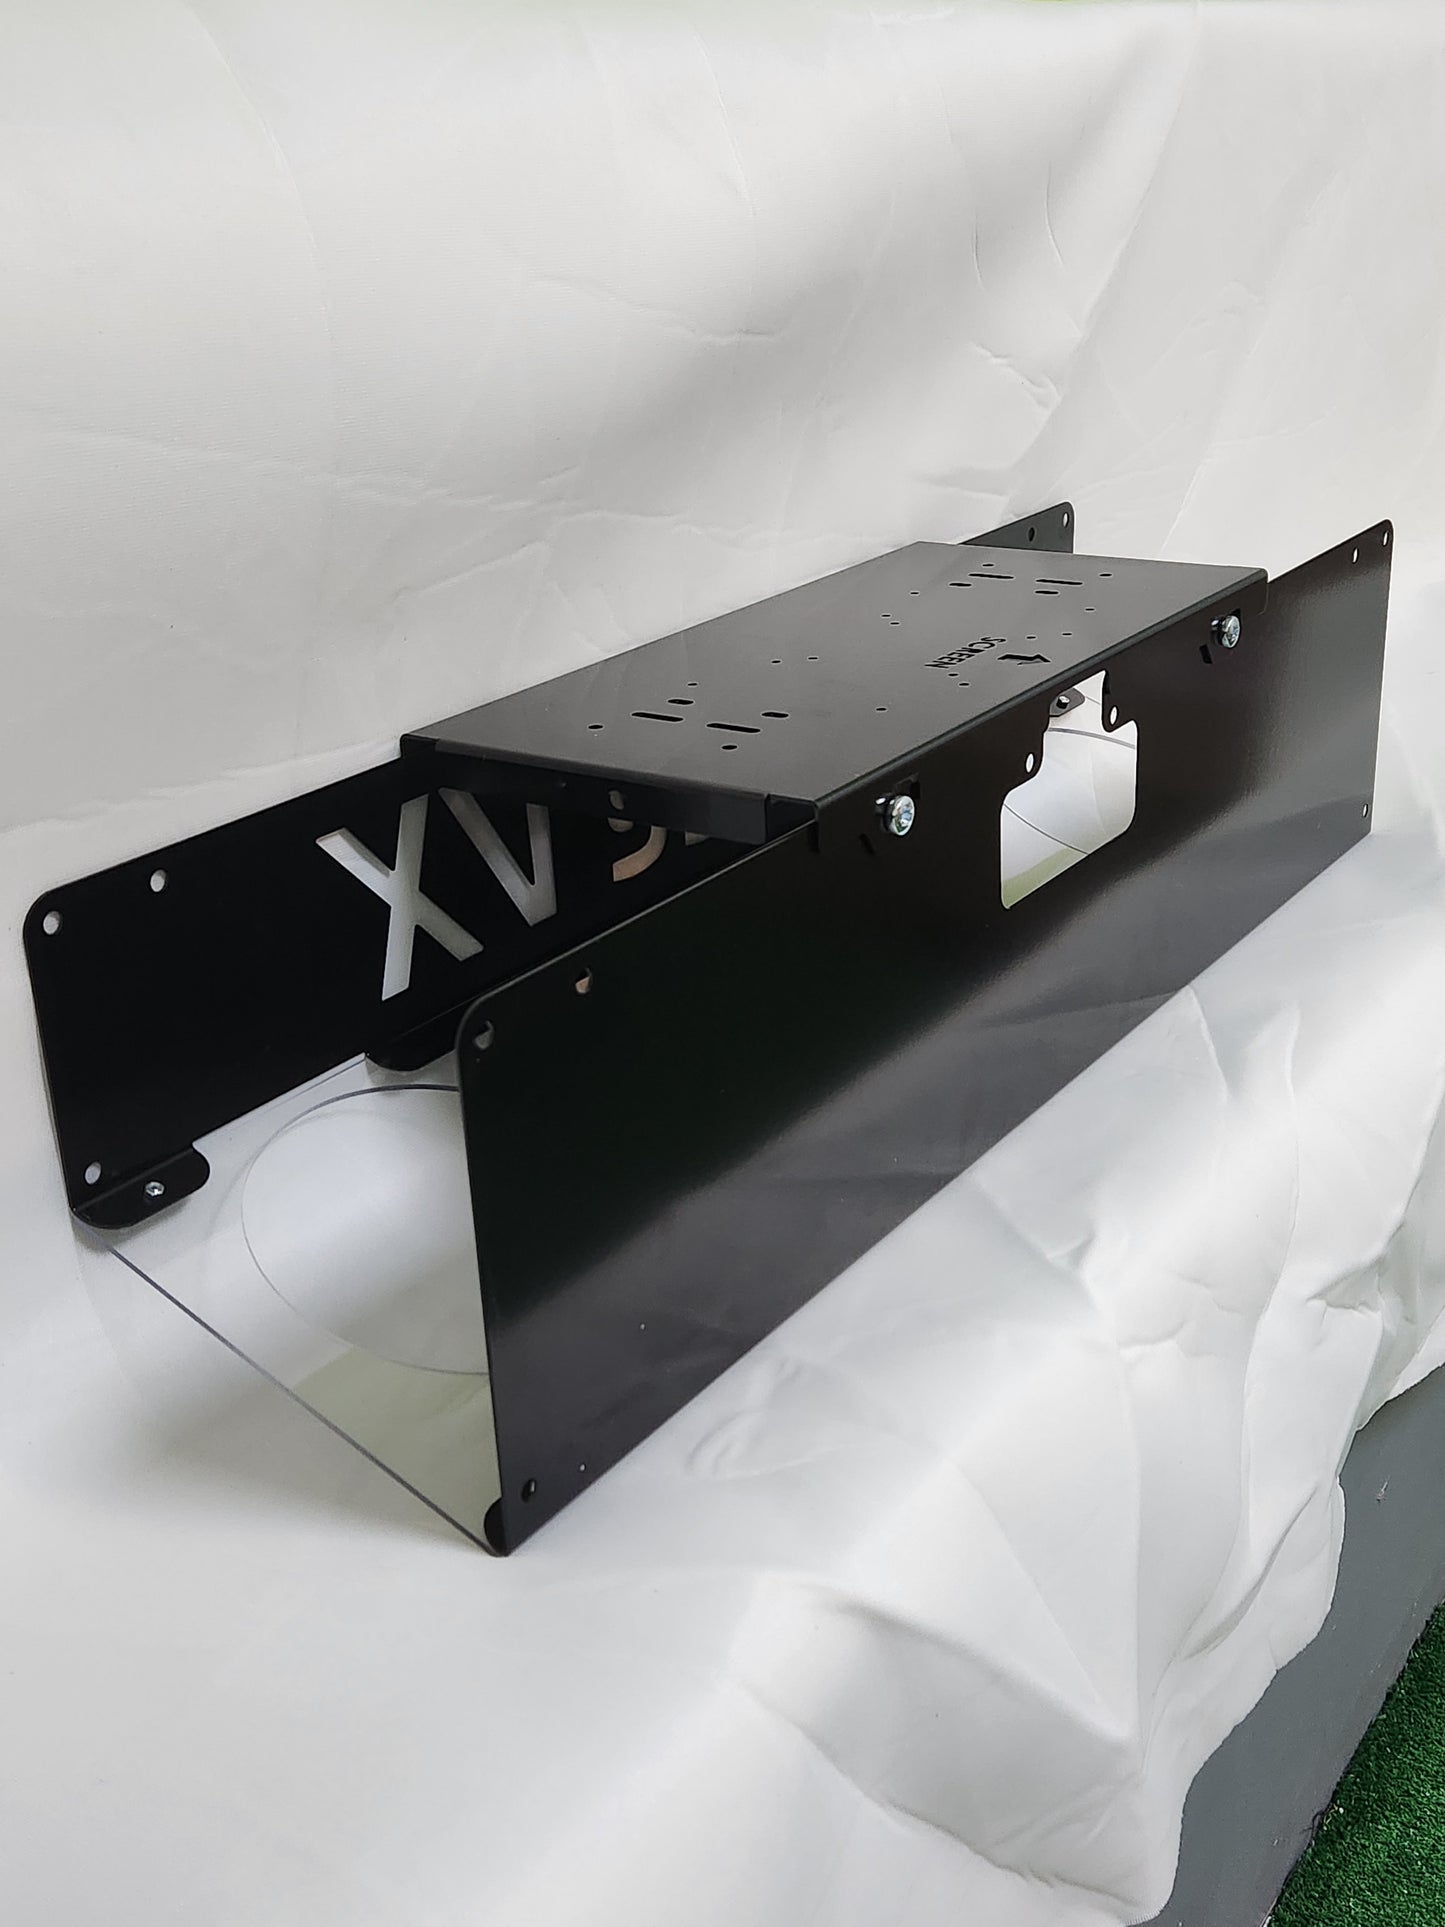 ProTee VX Protector plate